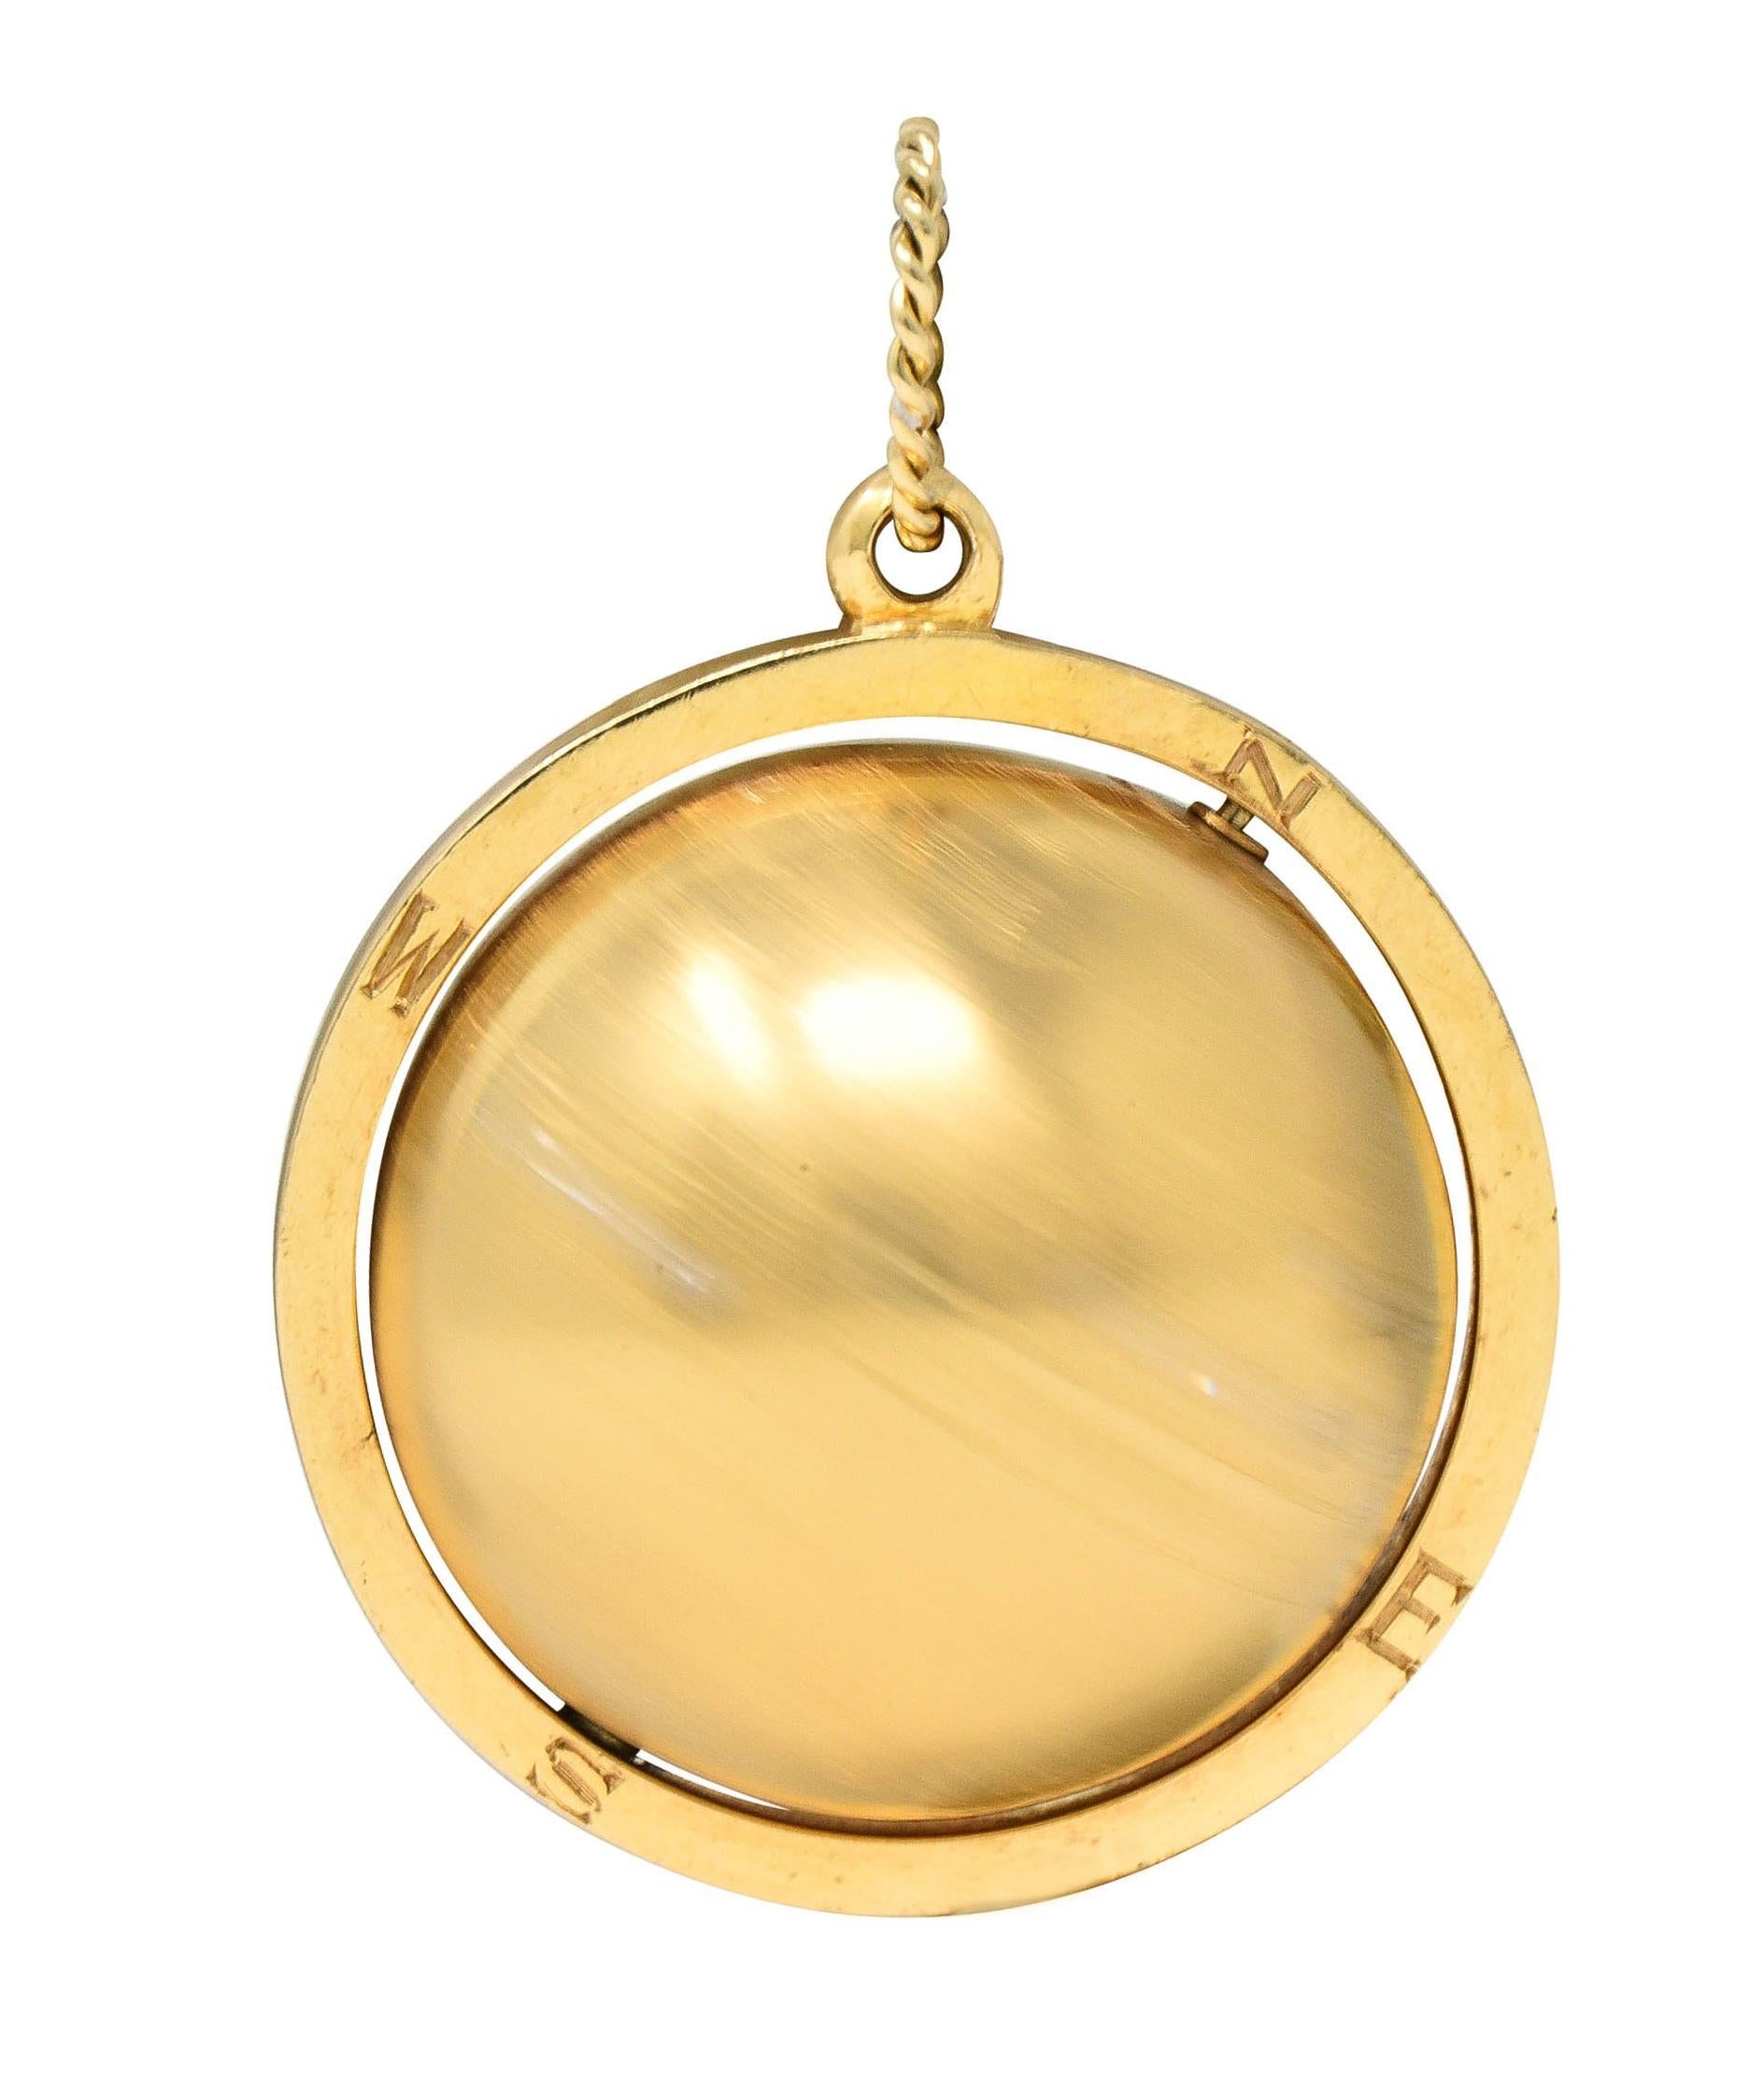 Designed as a gold sphere engraved as a world globe that spins on an axis 
Engraved with continent names and boundaries with textured oceans
Accented by flush set round brilliant cut diamonds at major cities
Weighing approximately 0.25 carat total -